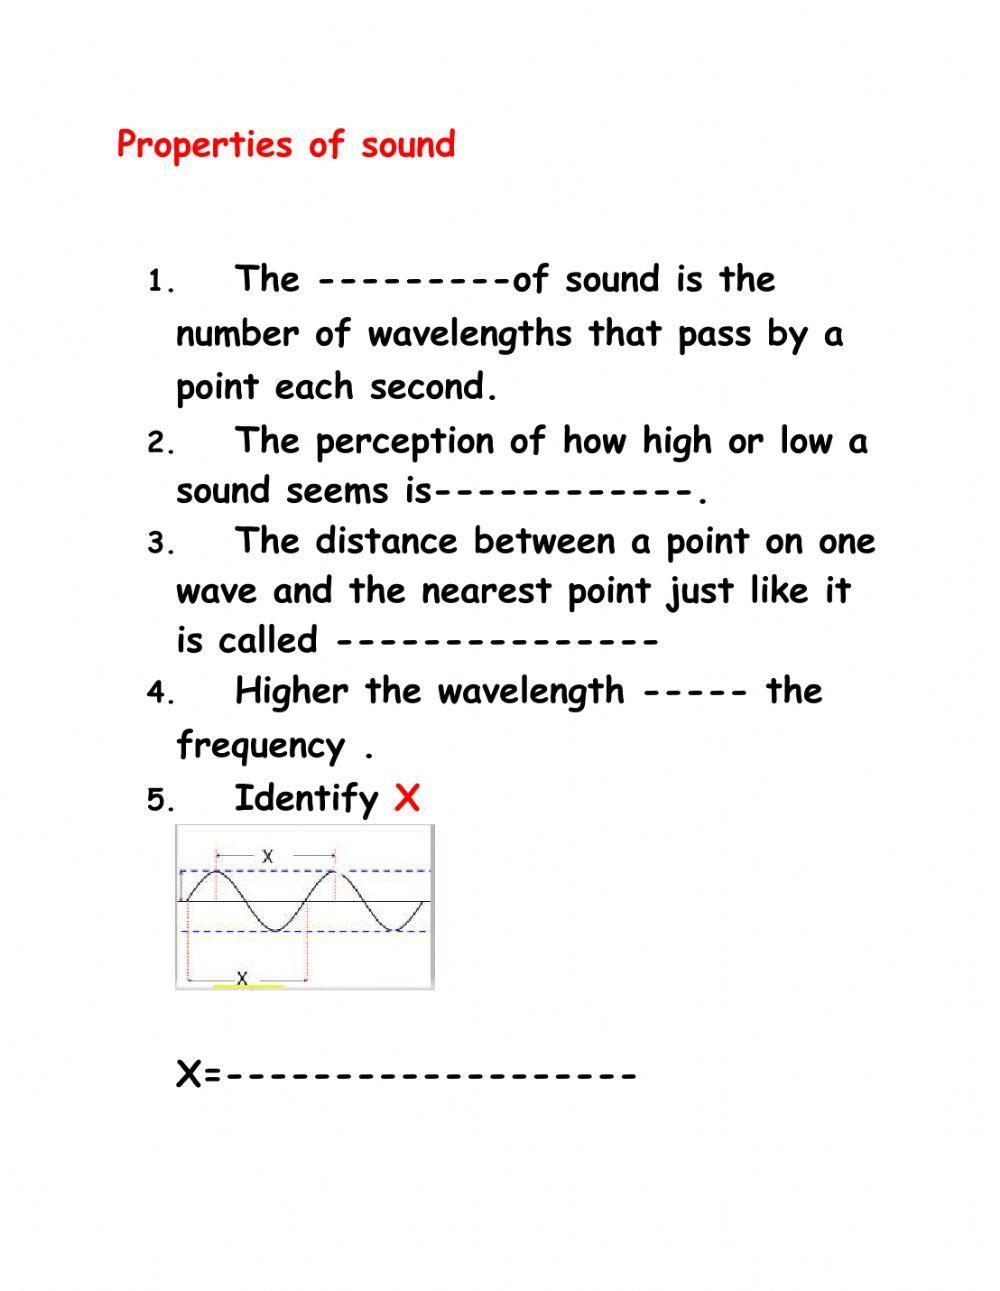 Properties of sound waves